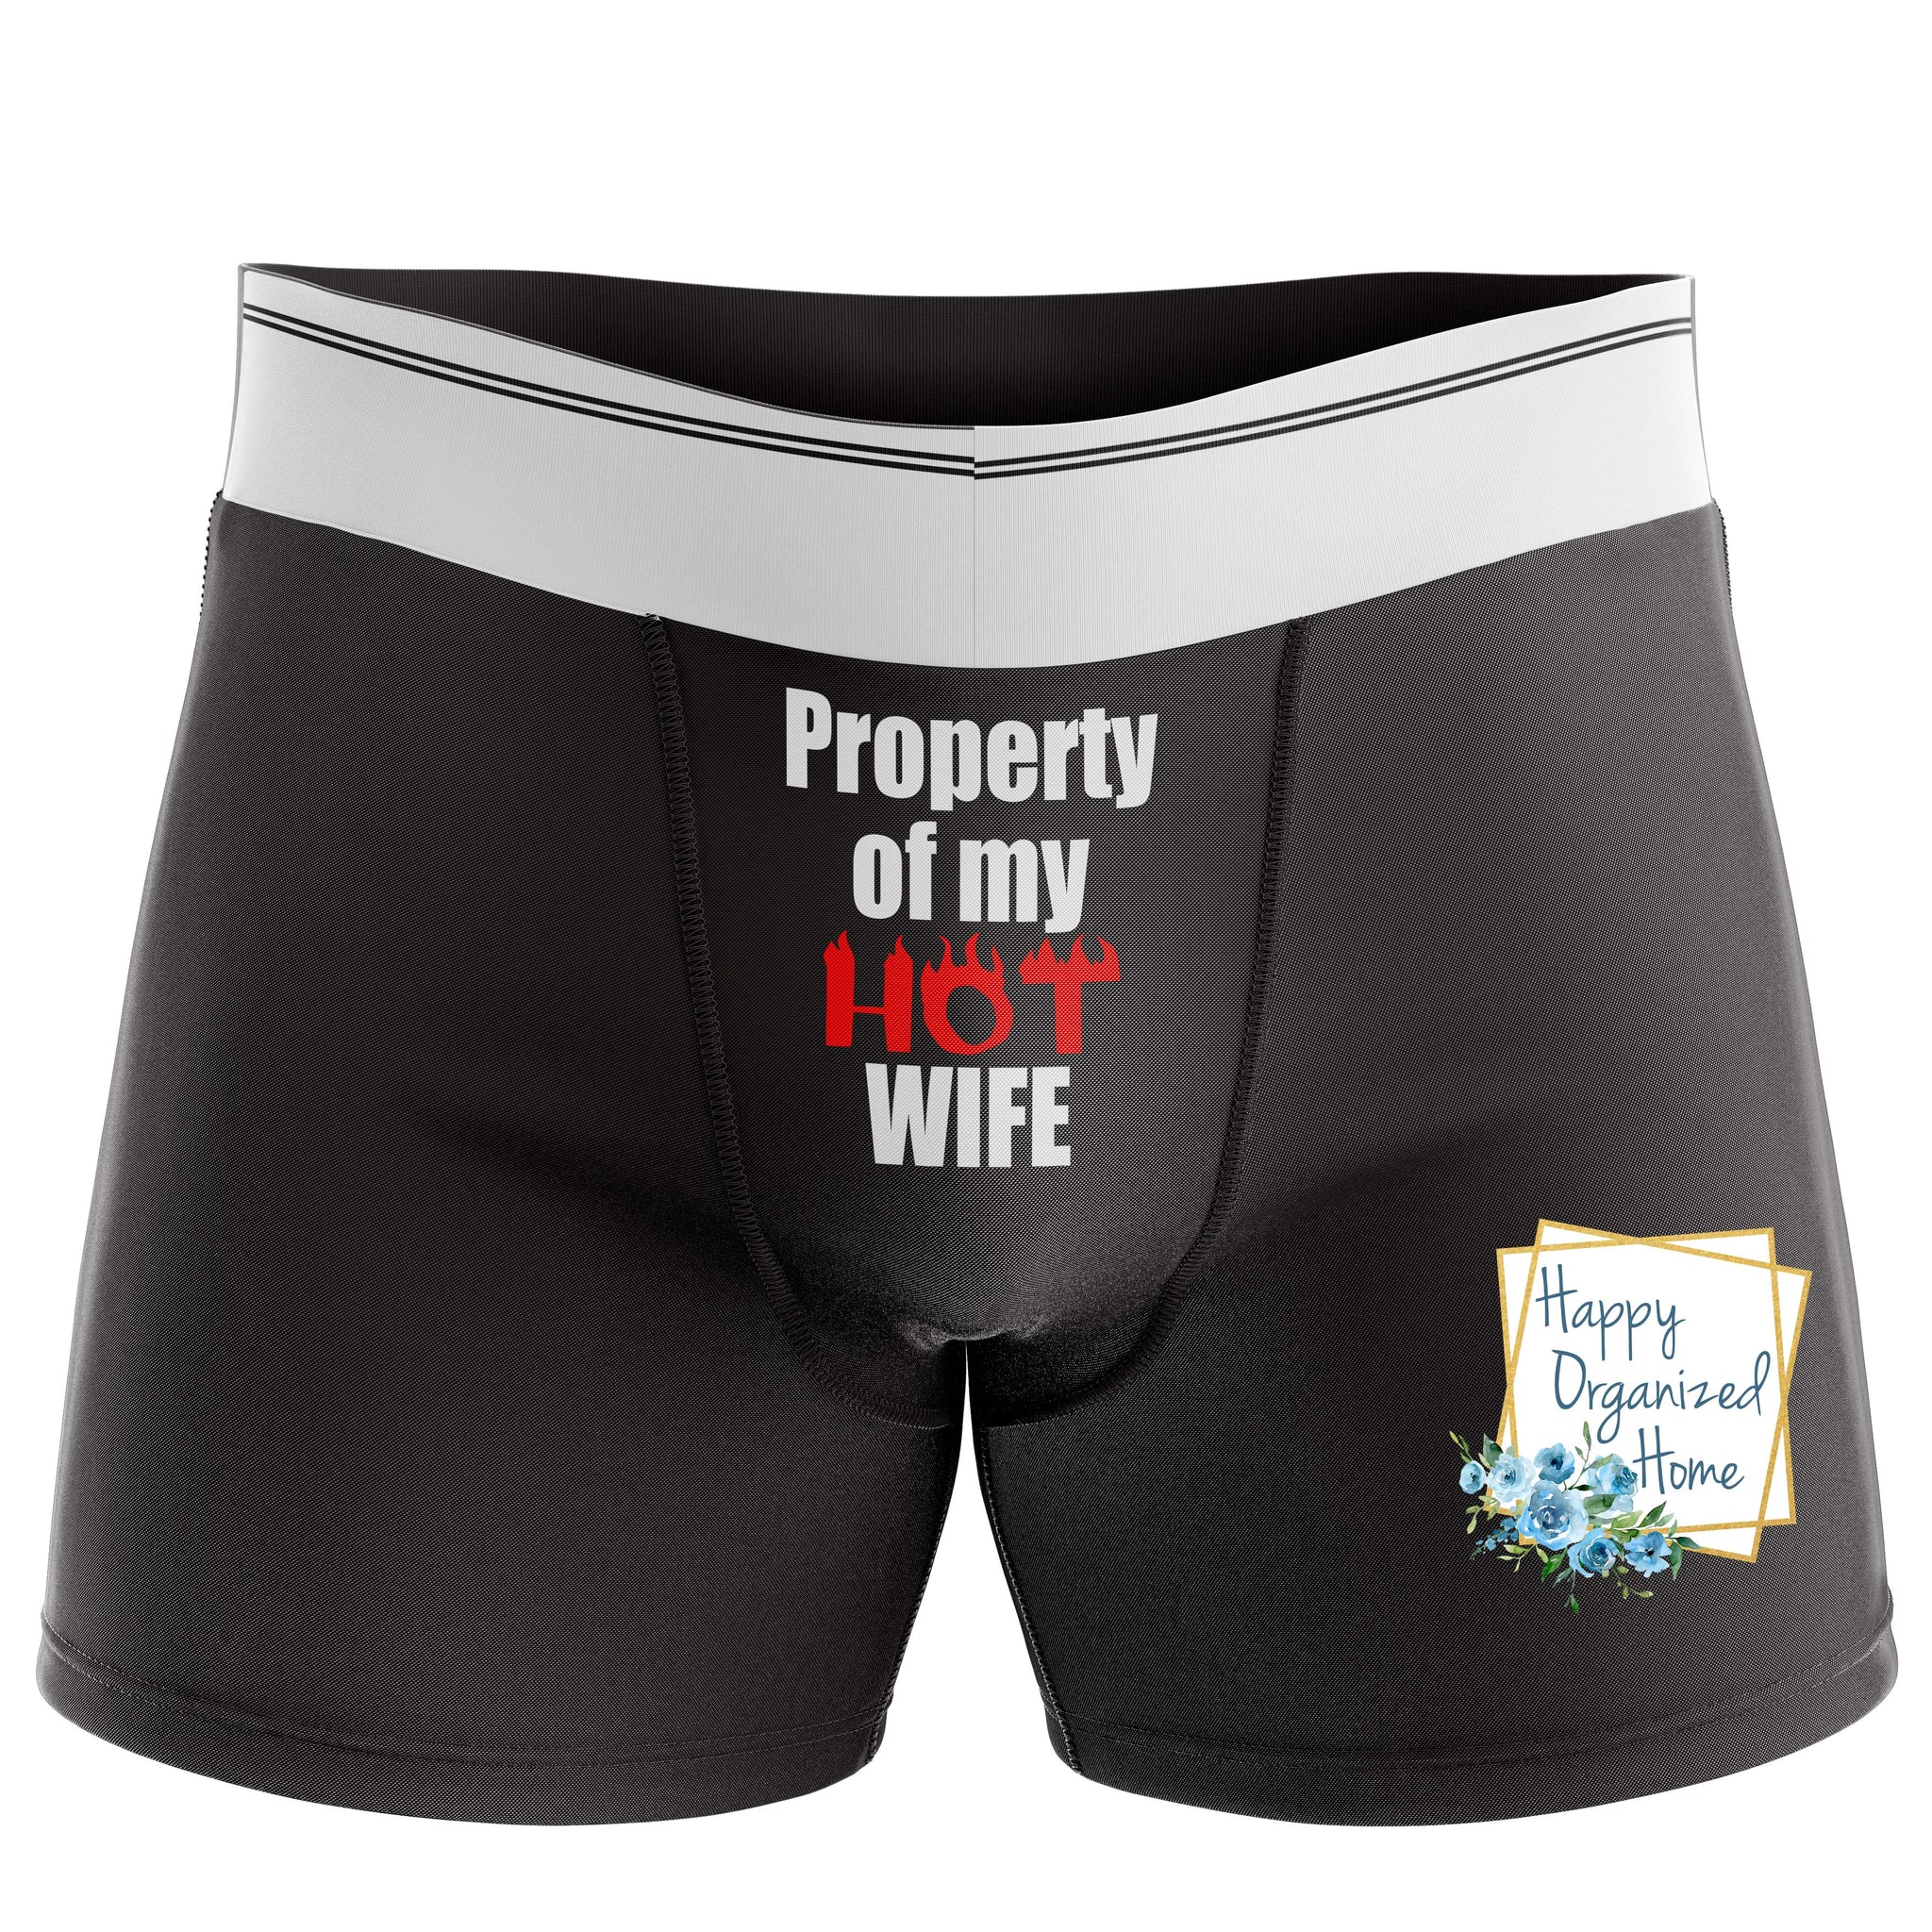 Property of my HOT wife - Men's Naughty Boxer Briefs – Happy